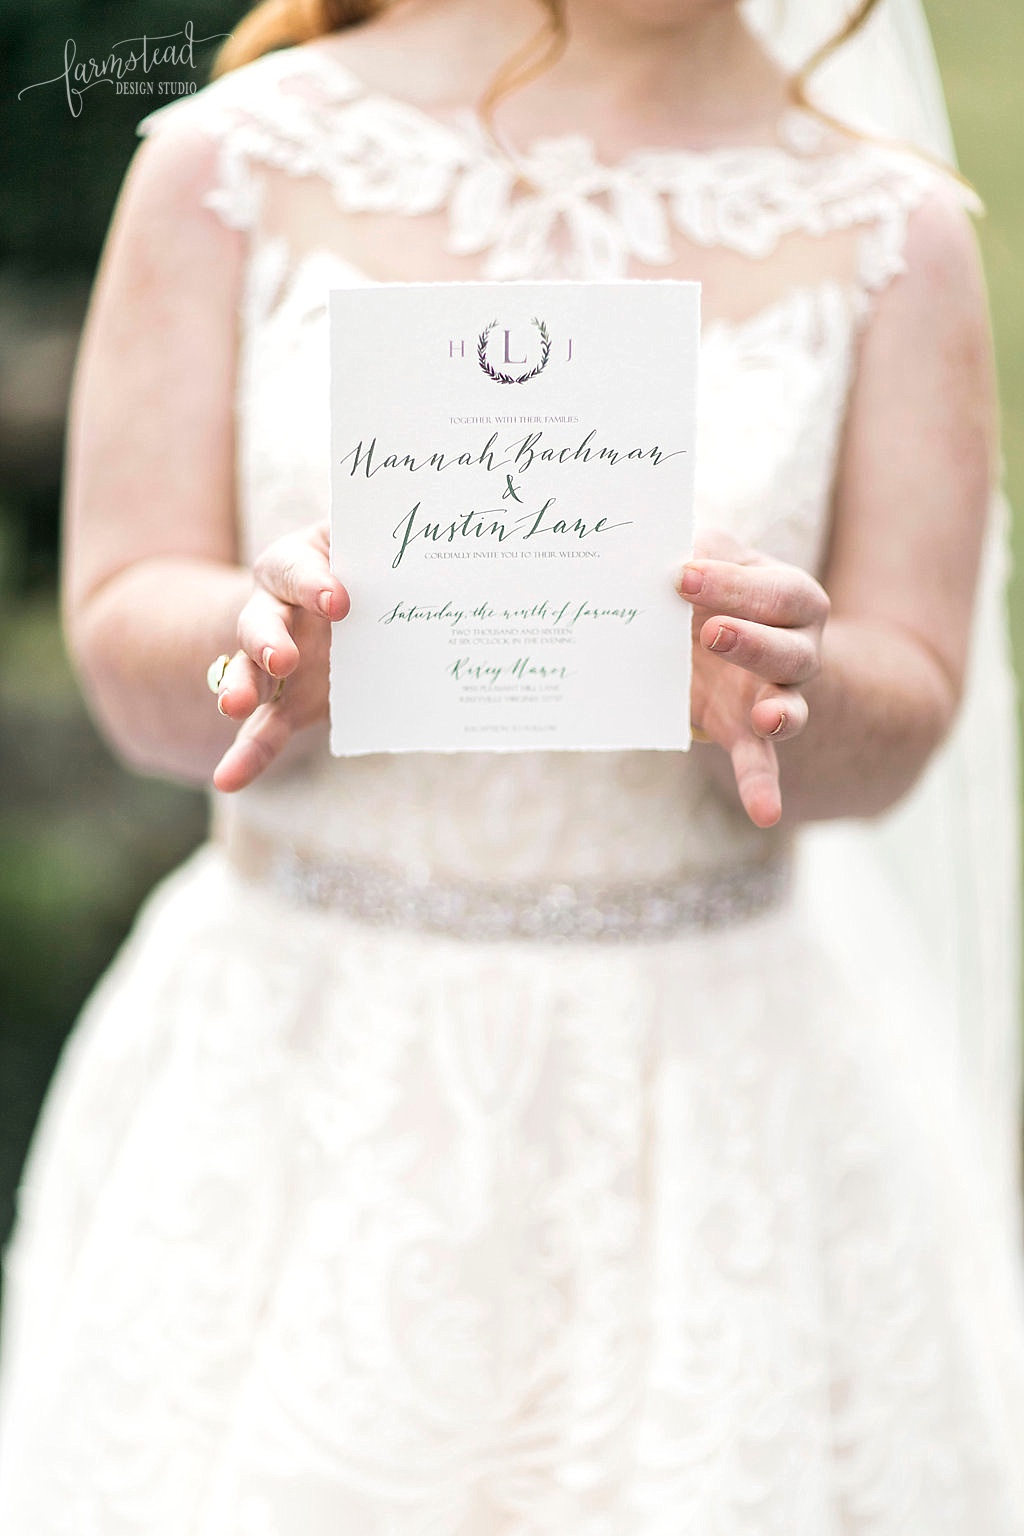 Green watercolor monogram crest, leaves and calligraphy wedding invitation suite by Farmstead Design Studio featuring Madeline Stuart Charlottesville Wedding Styled Shoot - www.homeonthefarmstead.com - calligraphy Simply Handwritten by Anna - Lieb Photographic